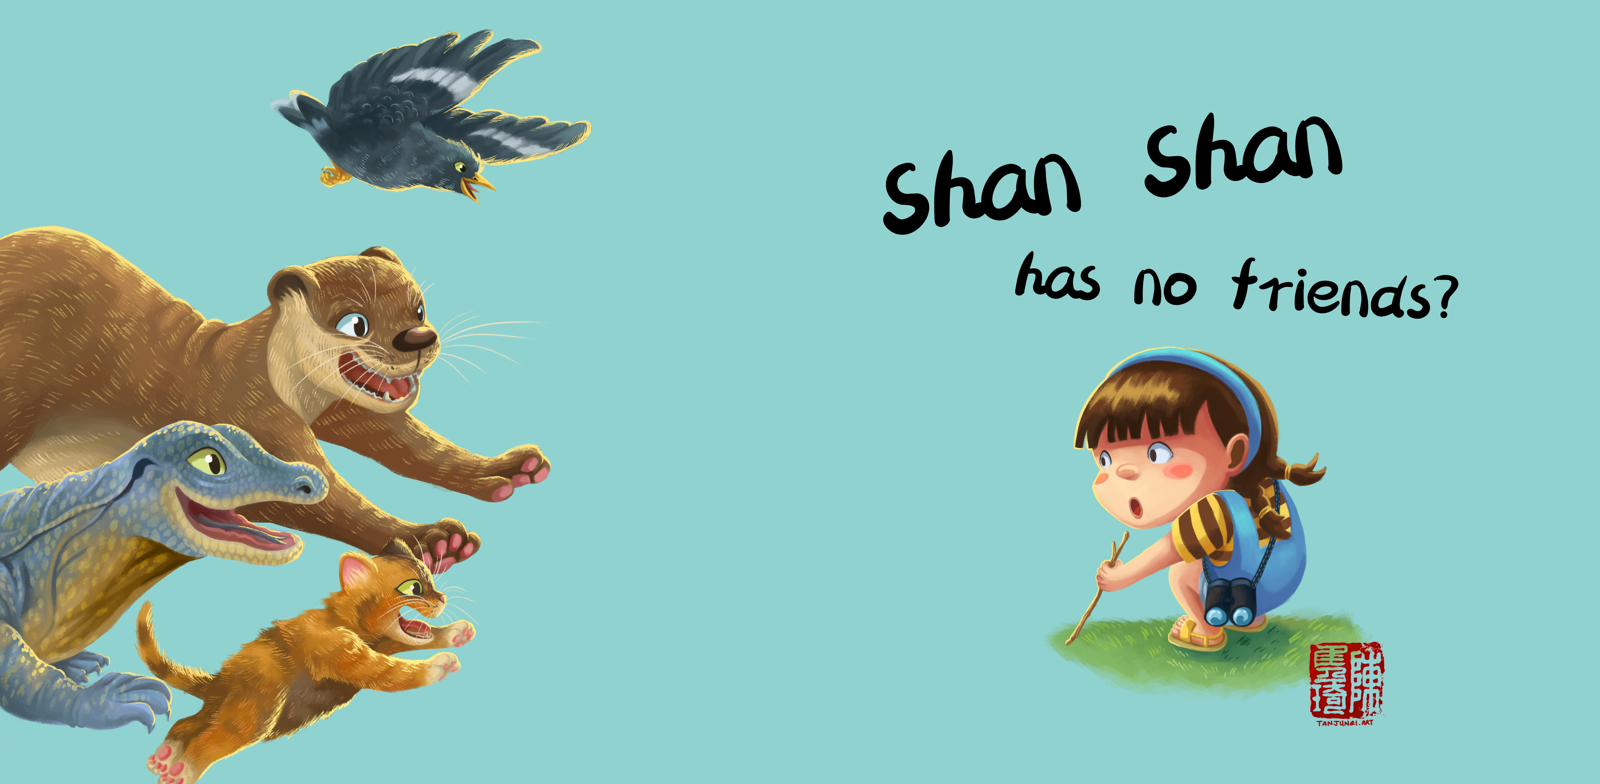 Book cover design (english version) for 'Shan Shan Has no Friends?'. The front cover shows Shan Shan squatting on a grassy patch playing with a twig of wood, looking to the left with a surprised expression. What she sees on the back cover are her animal friends - Little Sister Kitty, Ms. Water Monitor, Mr. Otter and Big Brother Myna - bounding and soaring towards her.